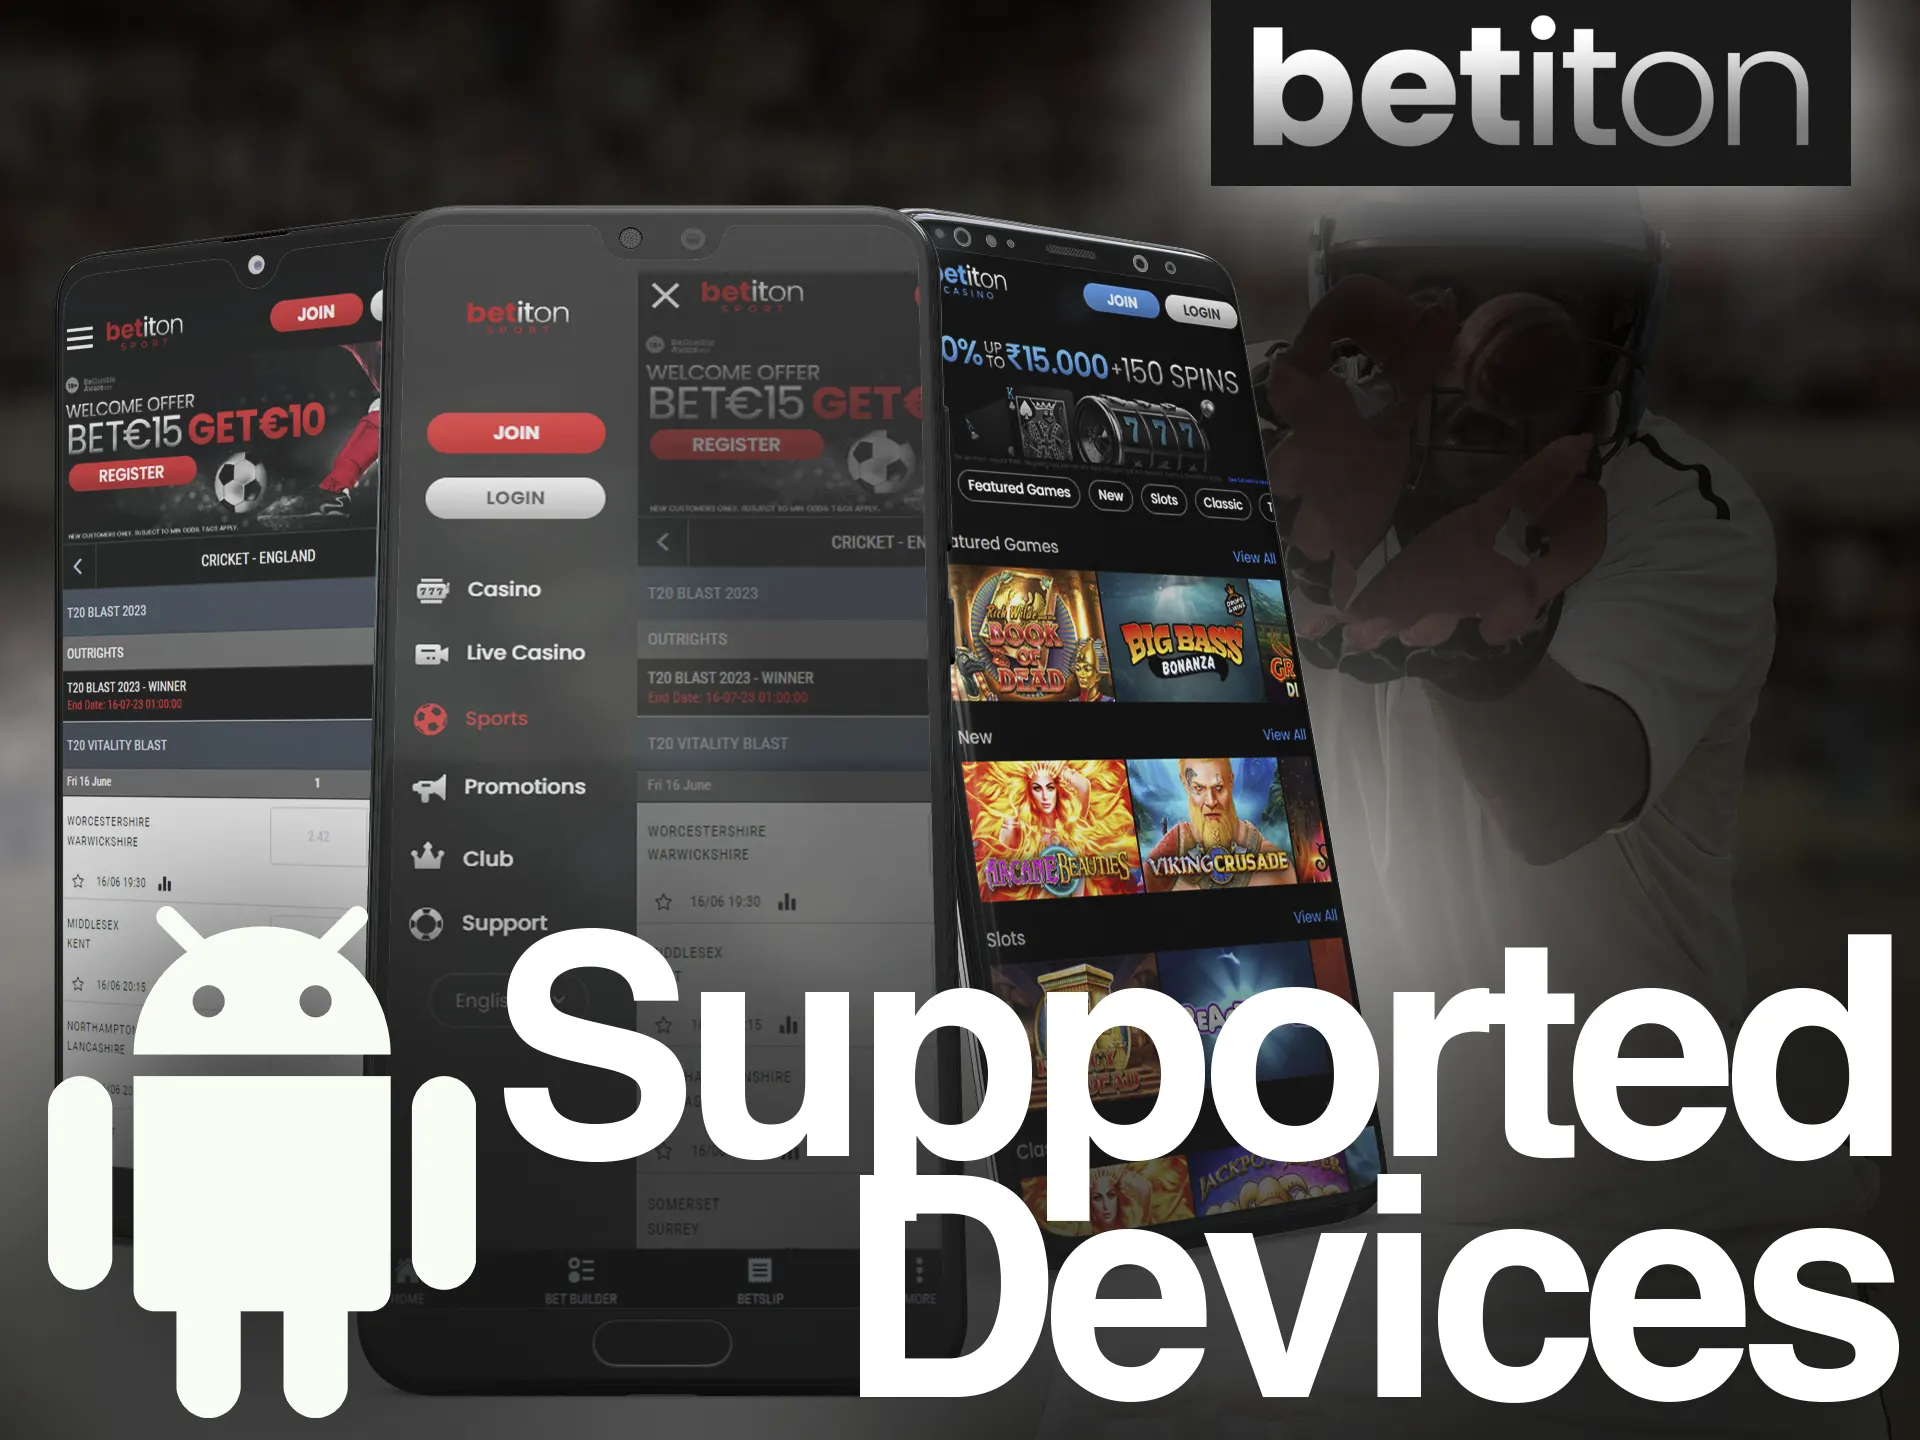 Use the Betiton Android app on any of your devices.